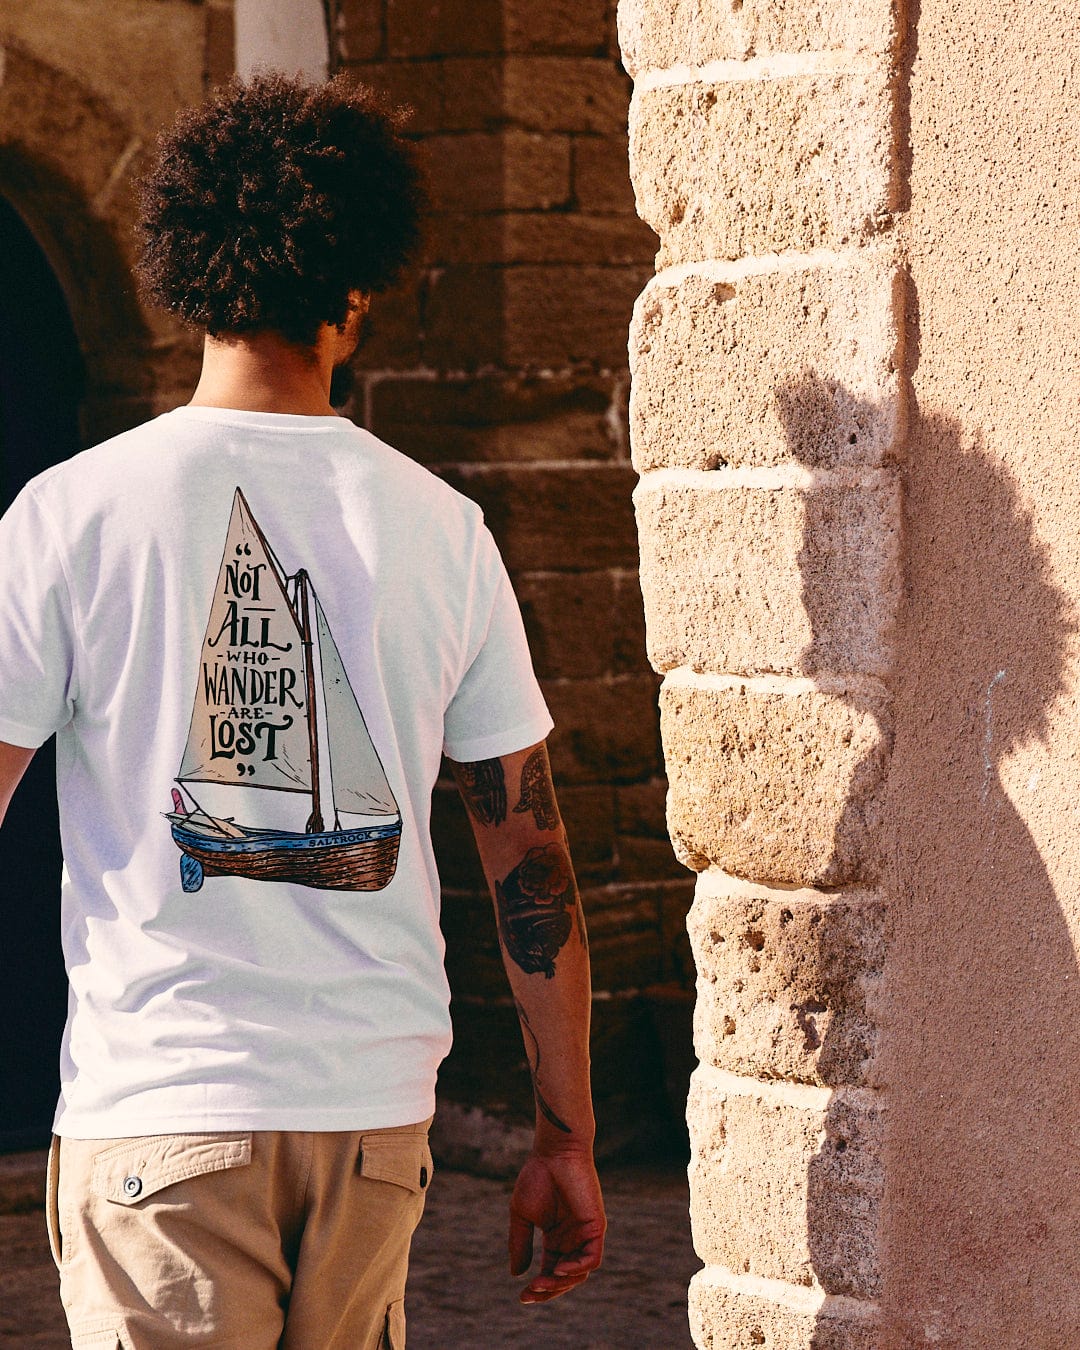 A man with curly hair and a tattooed arm wearing a crew neck t-shirt with a Saltrock Lost Ships Short Sleeve T-Shirt in White design, walking by a stone wall, holding sunglasses.